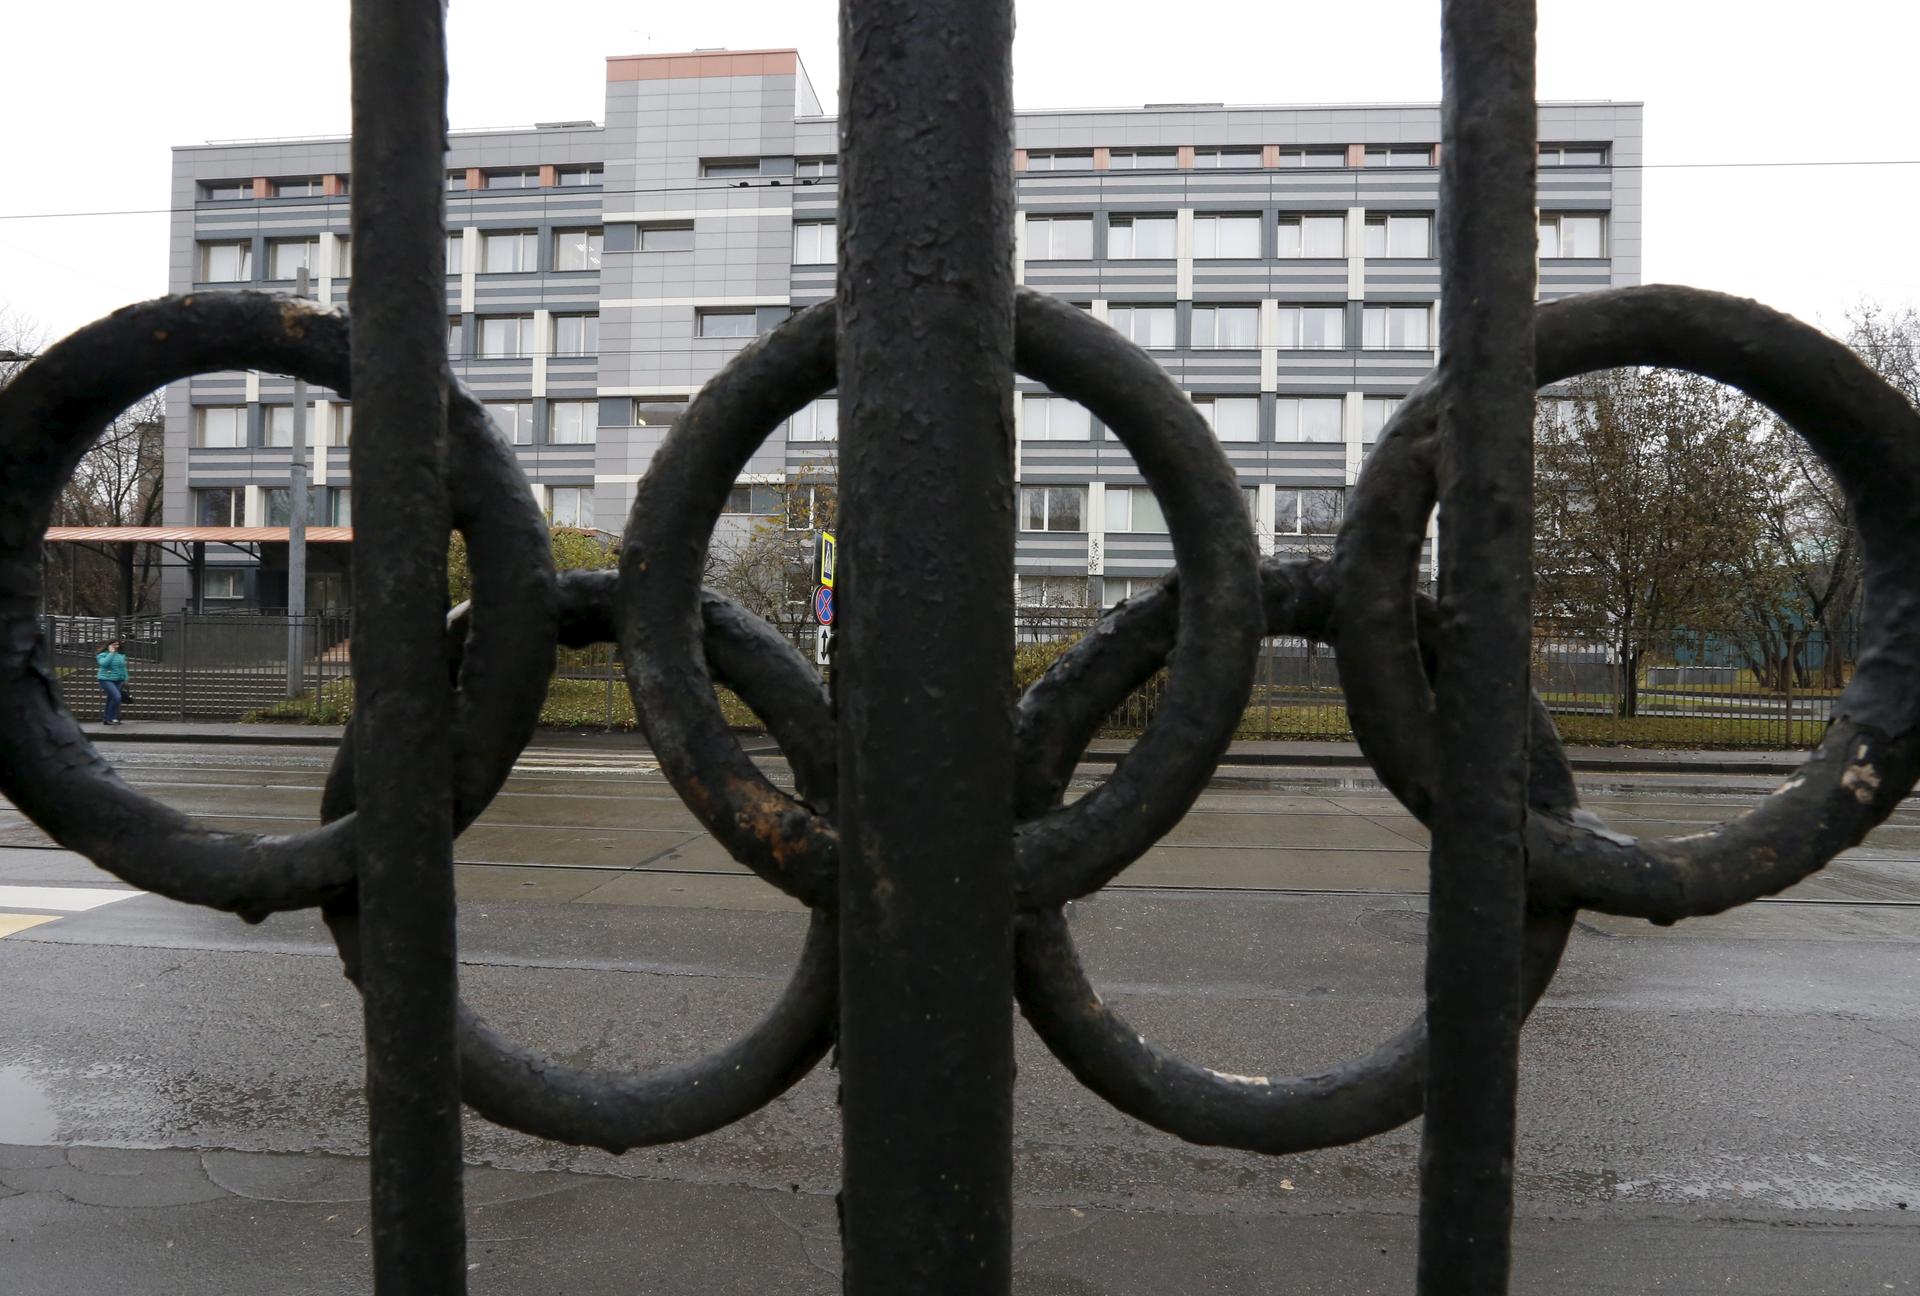 A view through a fence, decorated with the Olympic rings, shows a building which houses a laboratory accredited by the World Anti-Doping Agency (WADA), in Moscow, Russia on November 11, 2015.